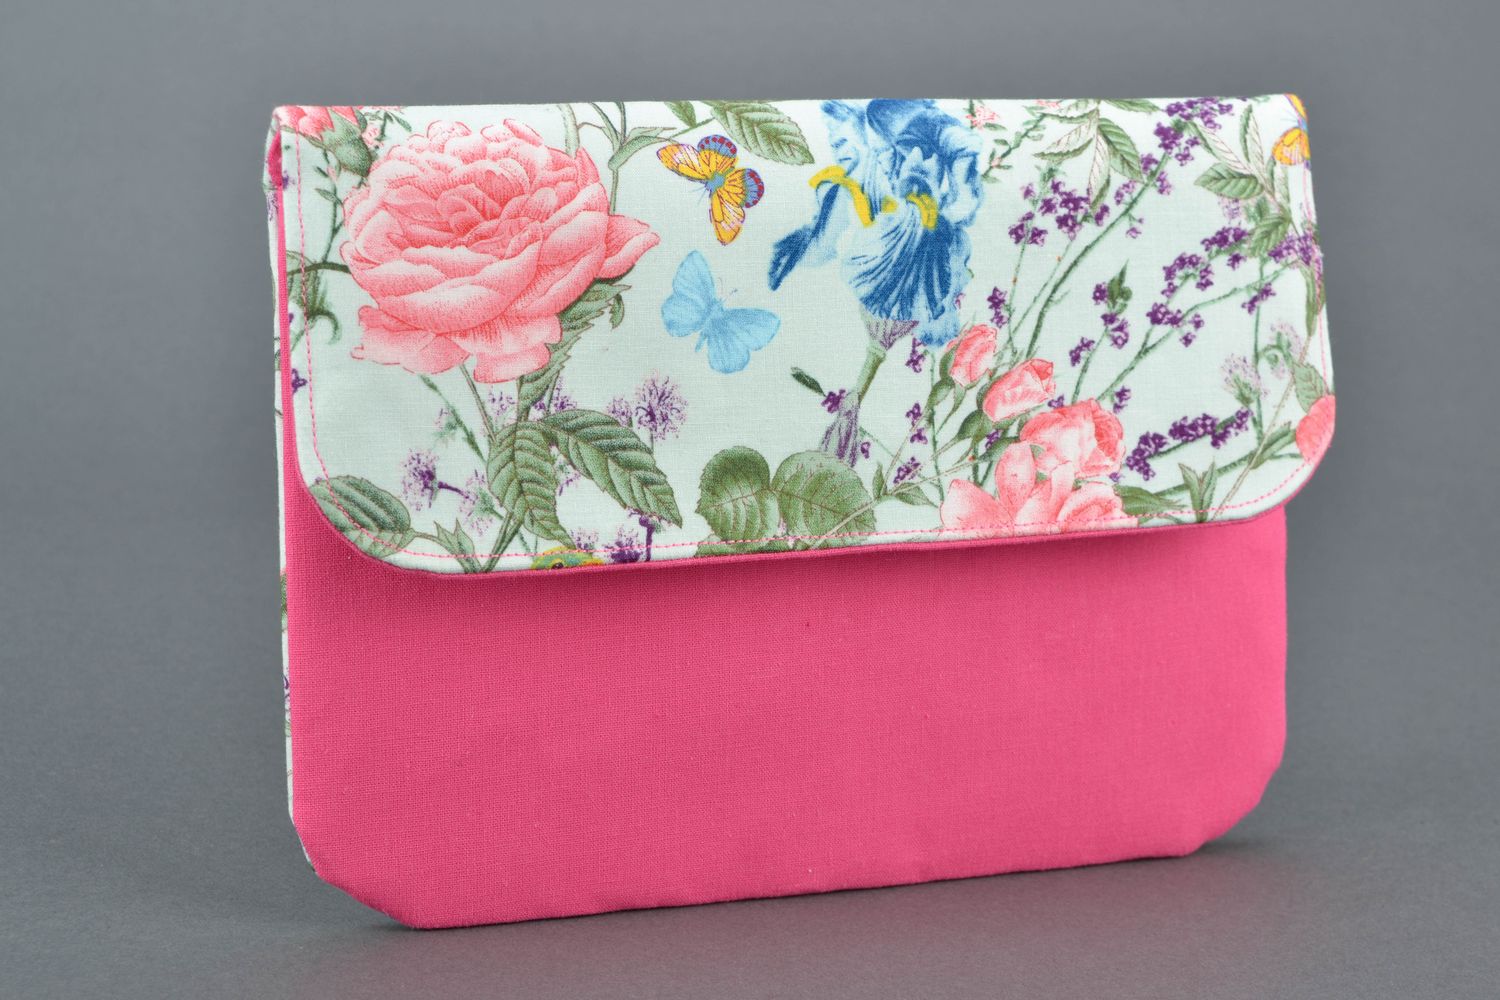 Handmade fabric clutch Roses and Butterflies photo 1